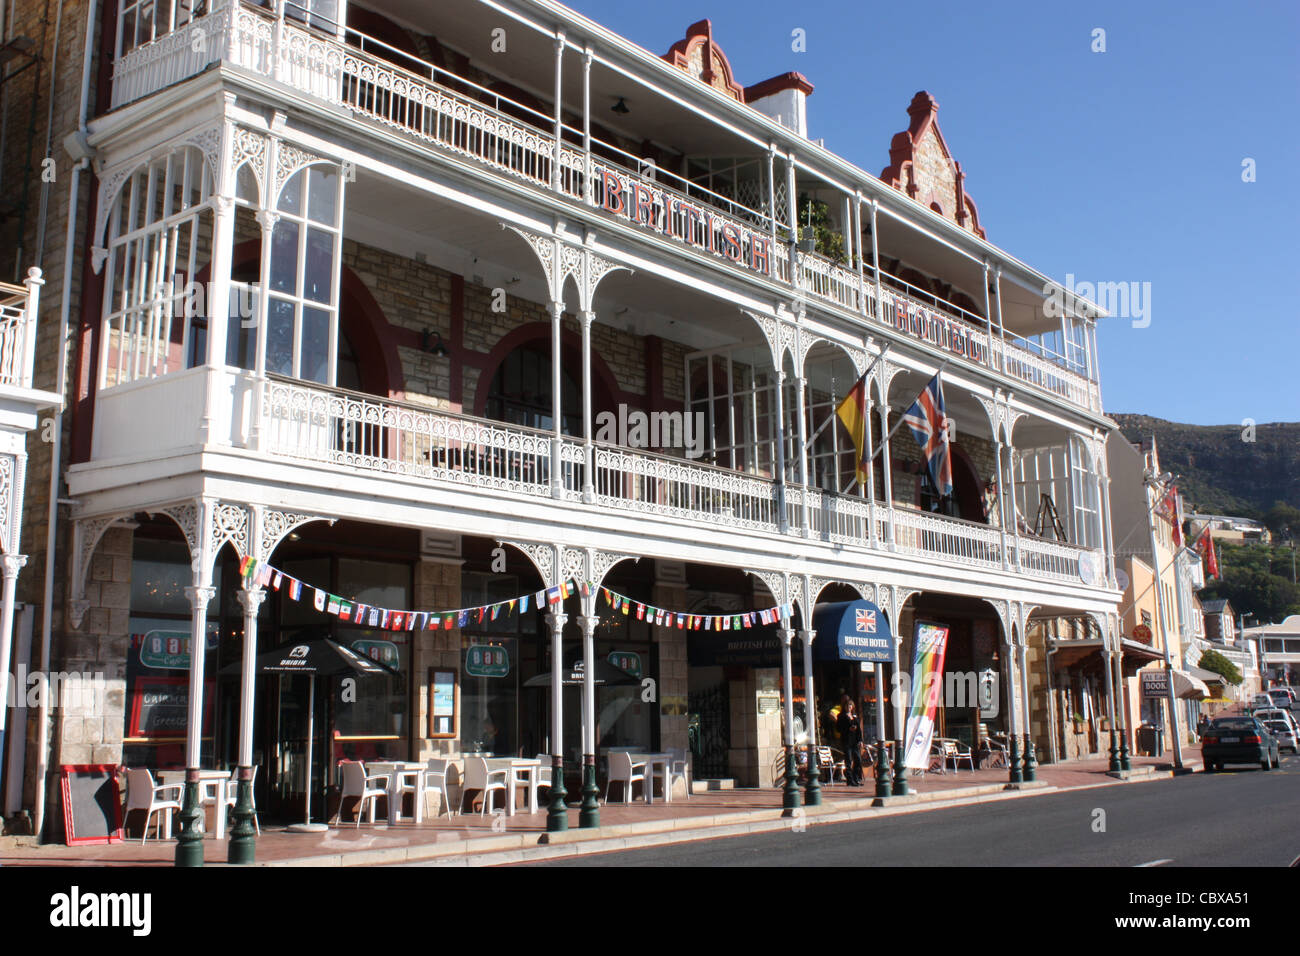 The British Hotel, Simon's Town, Cape Town, South Africa Stock Photo - Alamy